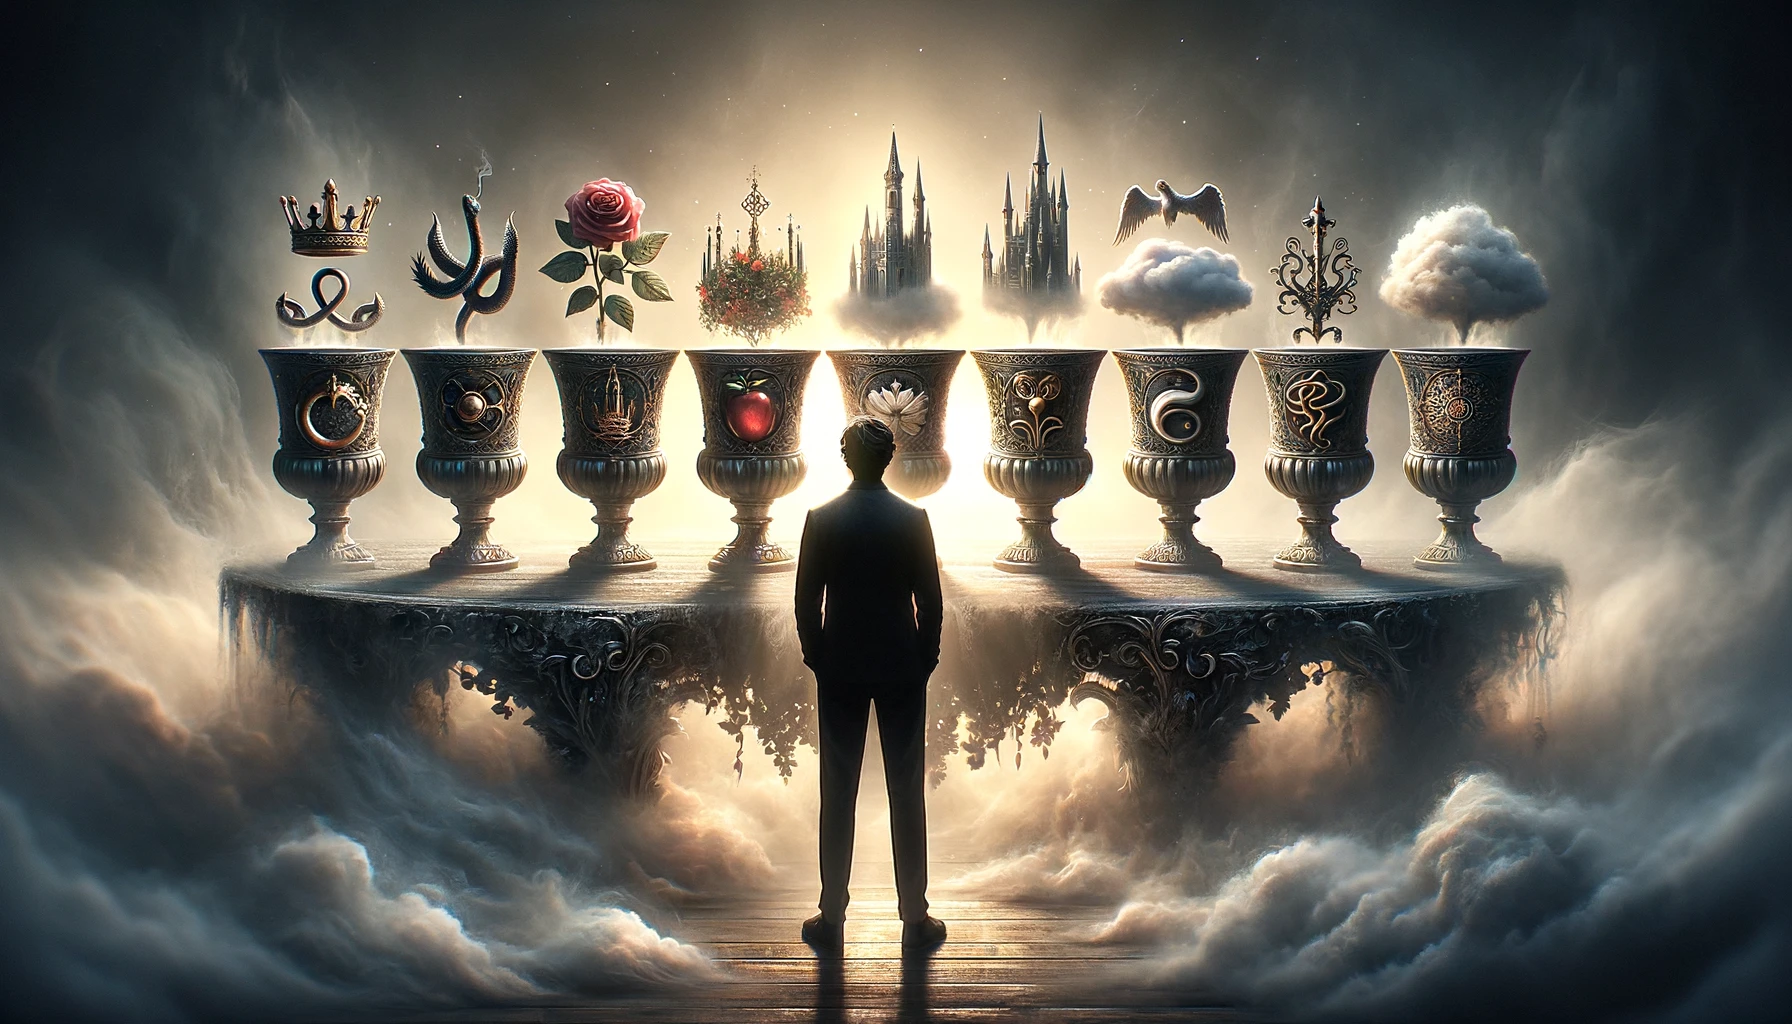 An image depicting a person standing before seven ornate cups on a mist covered table. Each cup holds a distinct symbol a crown a snake a castle a